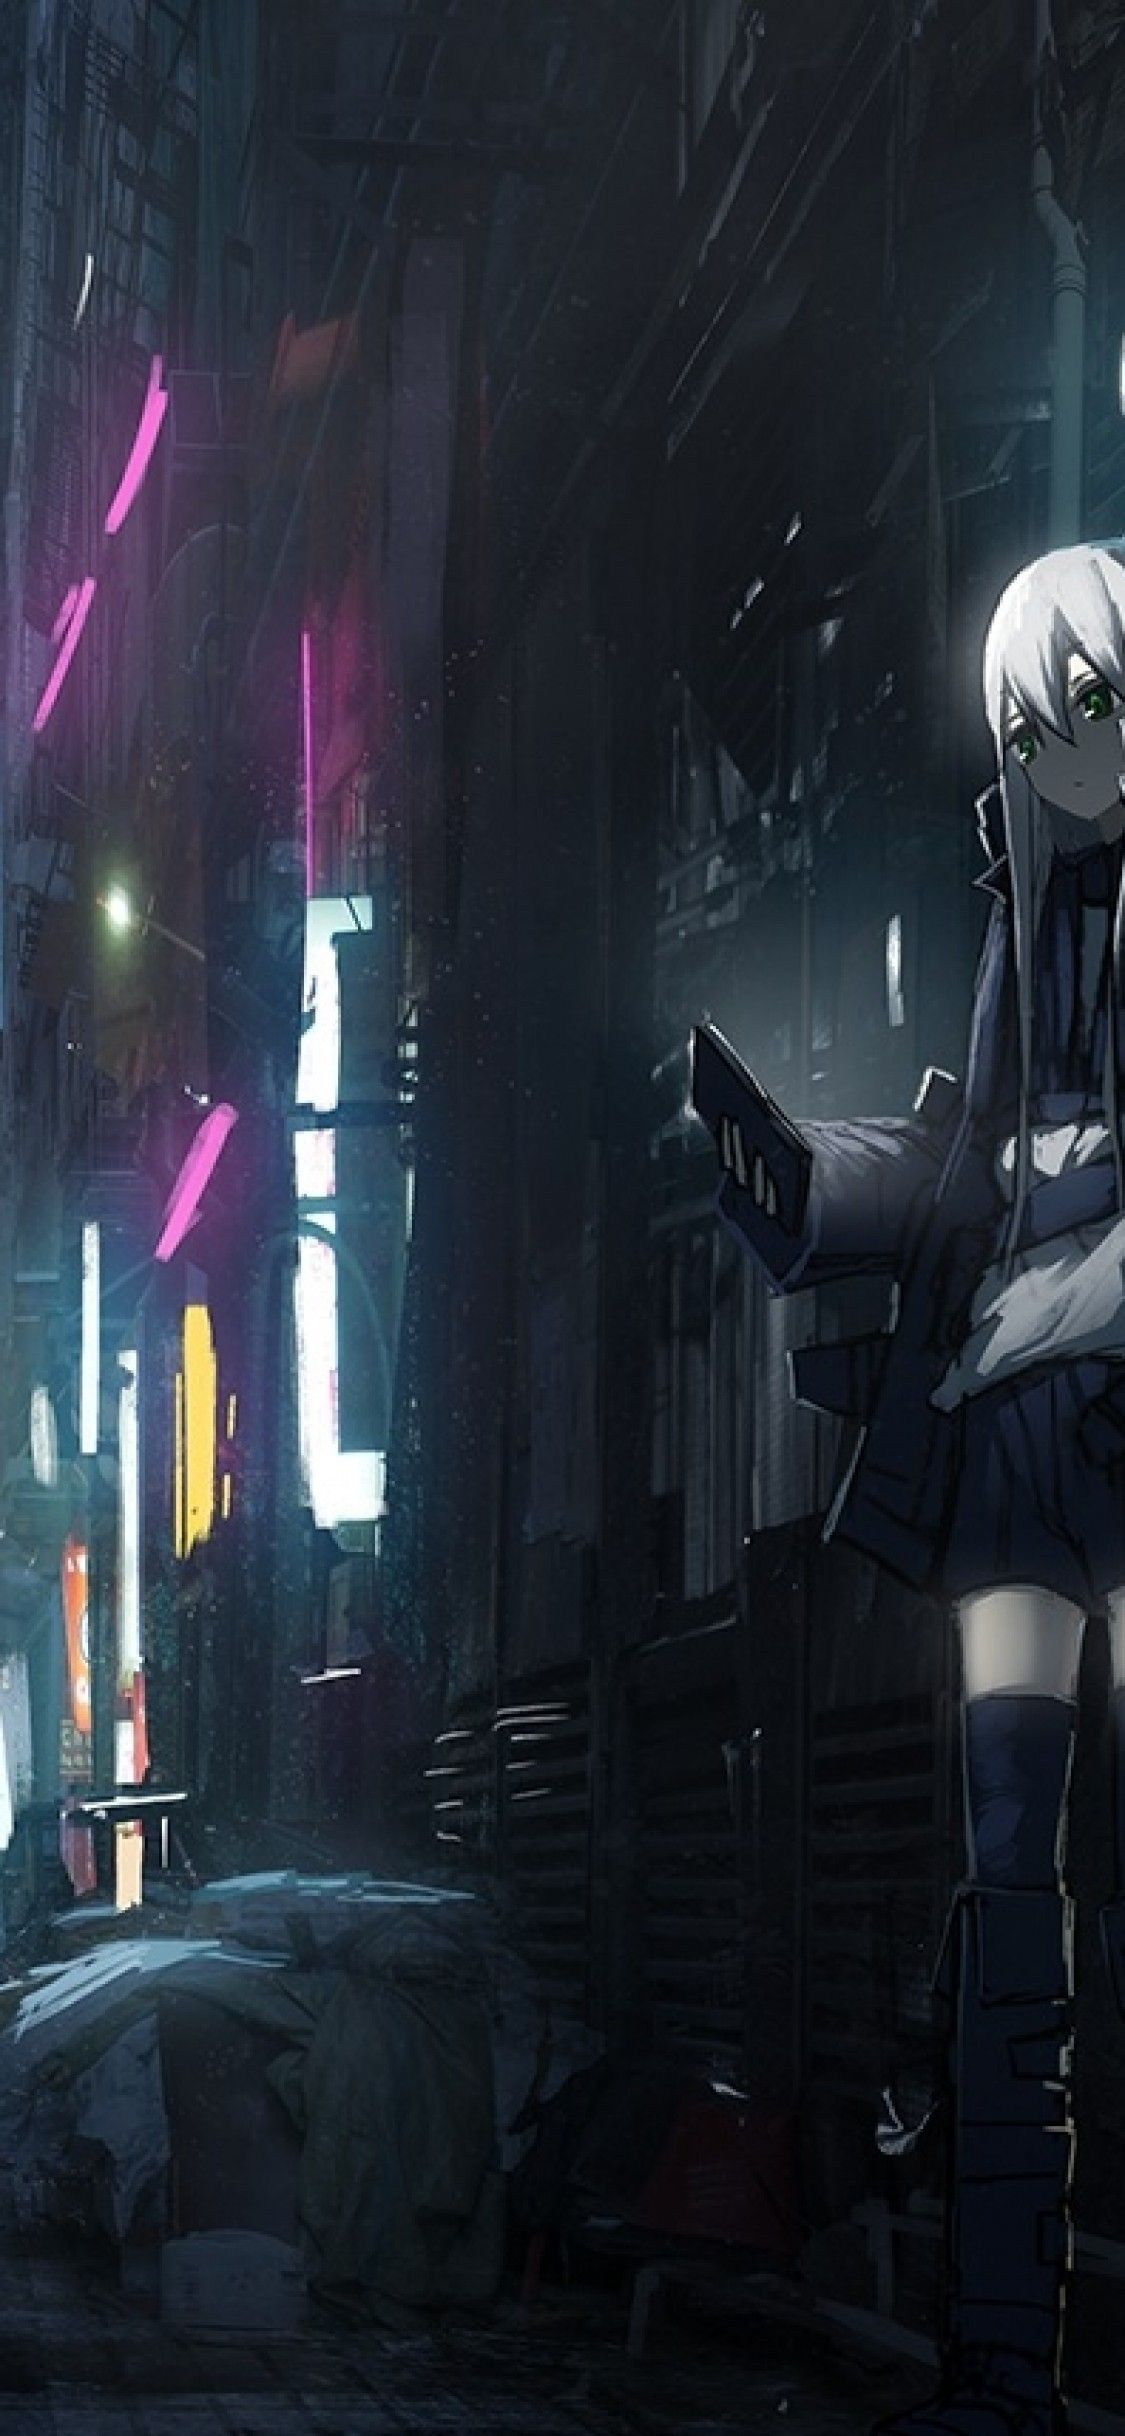 Download 1125x2436 Anime Dark City, Skyscrapers, Back Streets, Girl, People, Neon Lights Wallpaper for iPhone 11 Pro & X